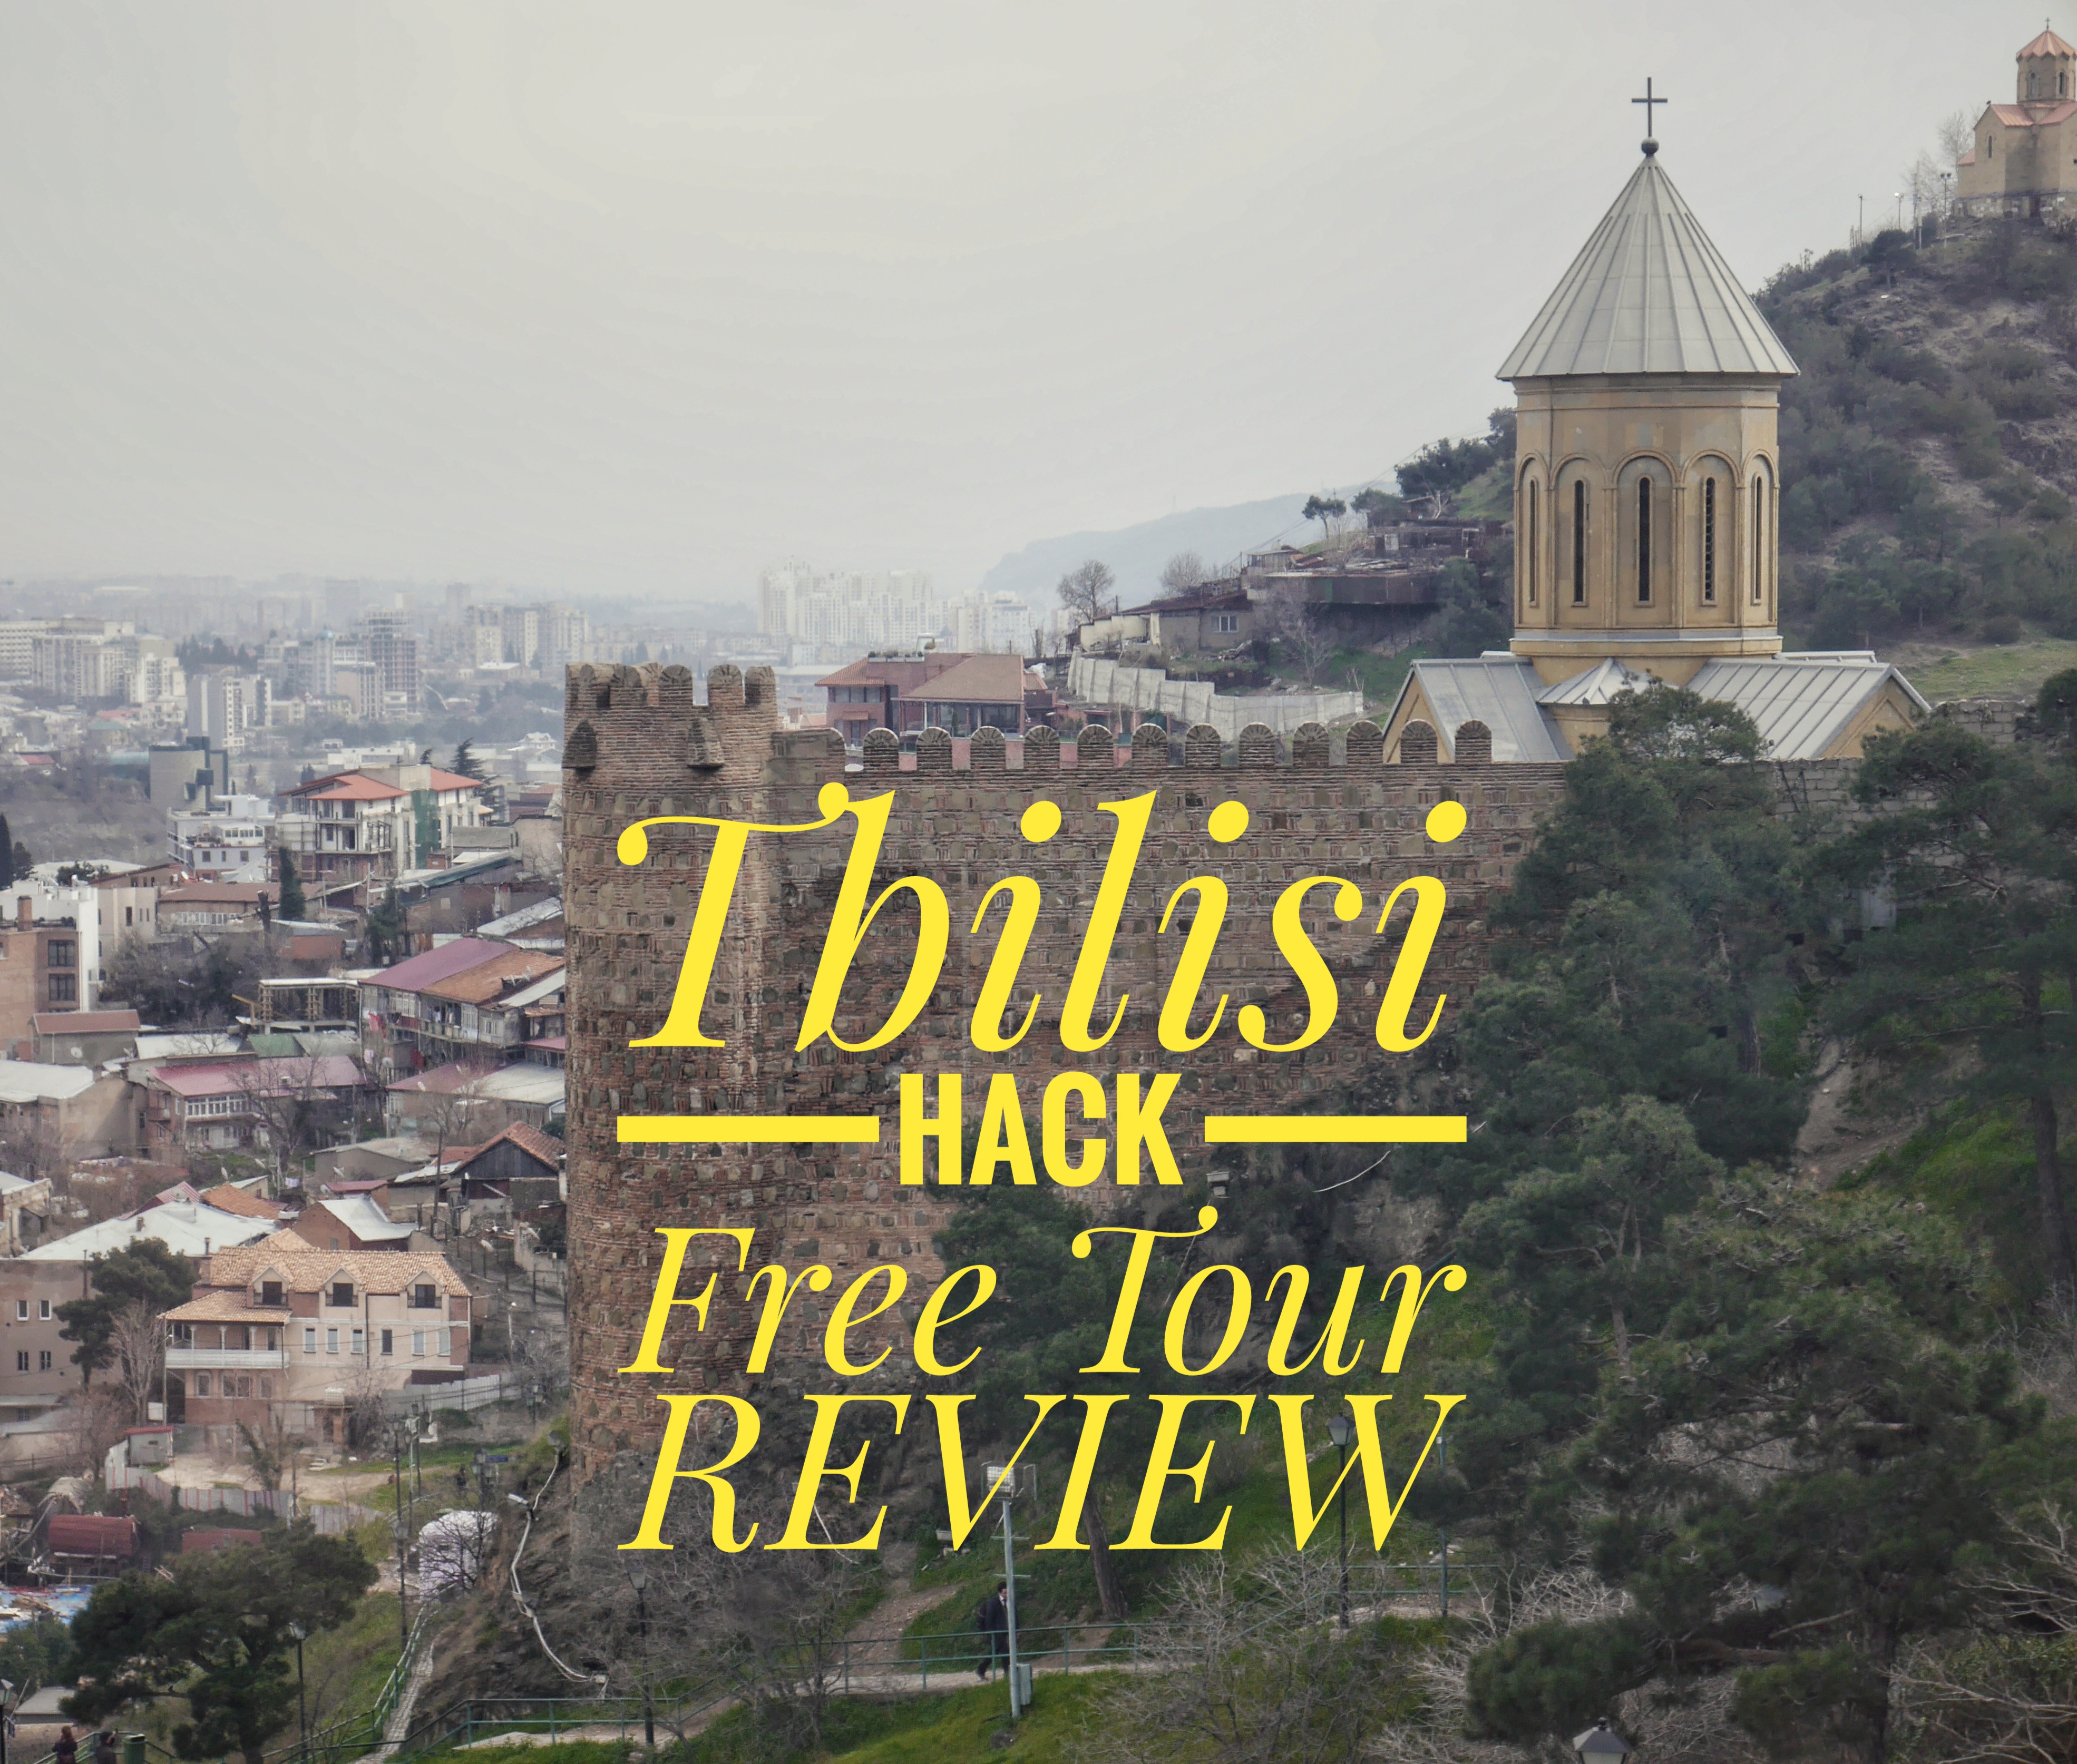 Ghost recommend best of riding homemade rsed tbilisi